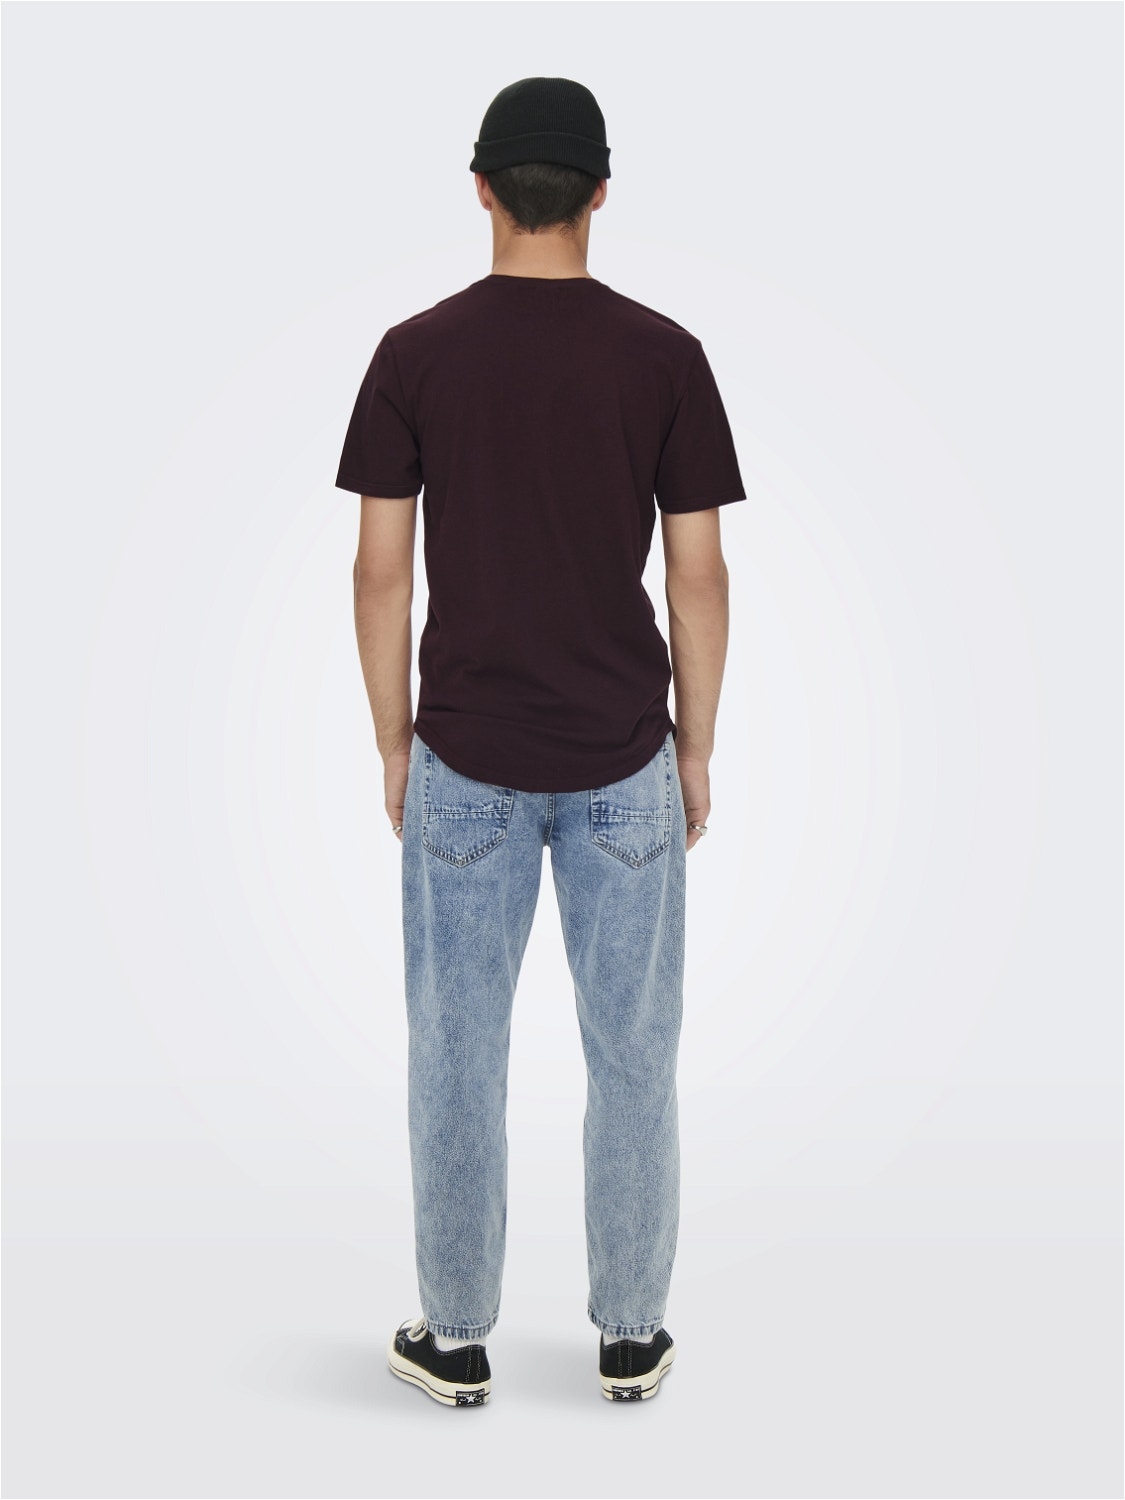 ONLY & SONS Long Line Fit Round Neck T-Shirt -Fudge - 22002973